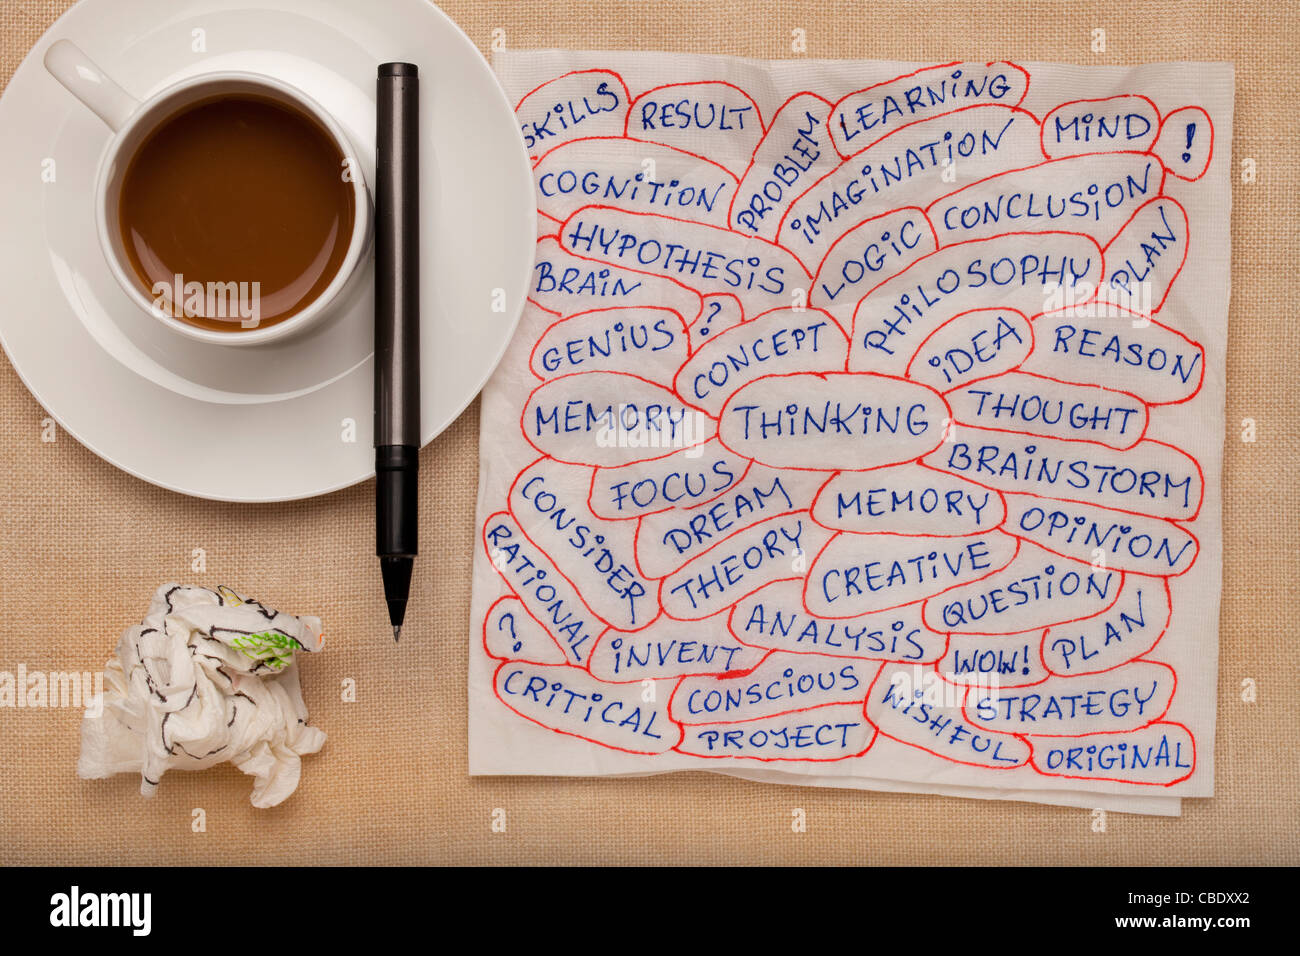 thinking and related topics - word collage on napkin with coffee cup against tablecloth Stock Photo